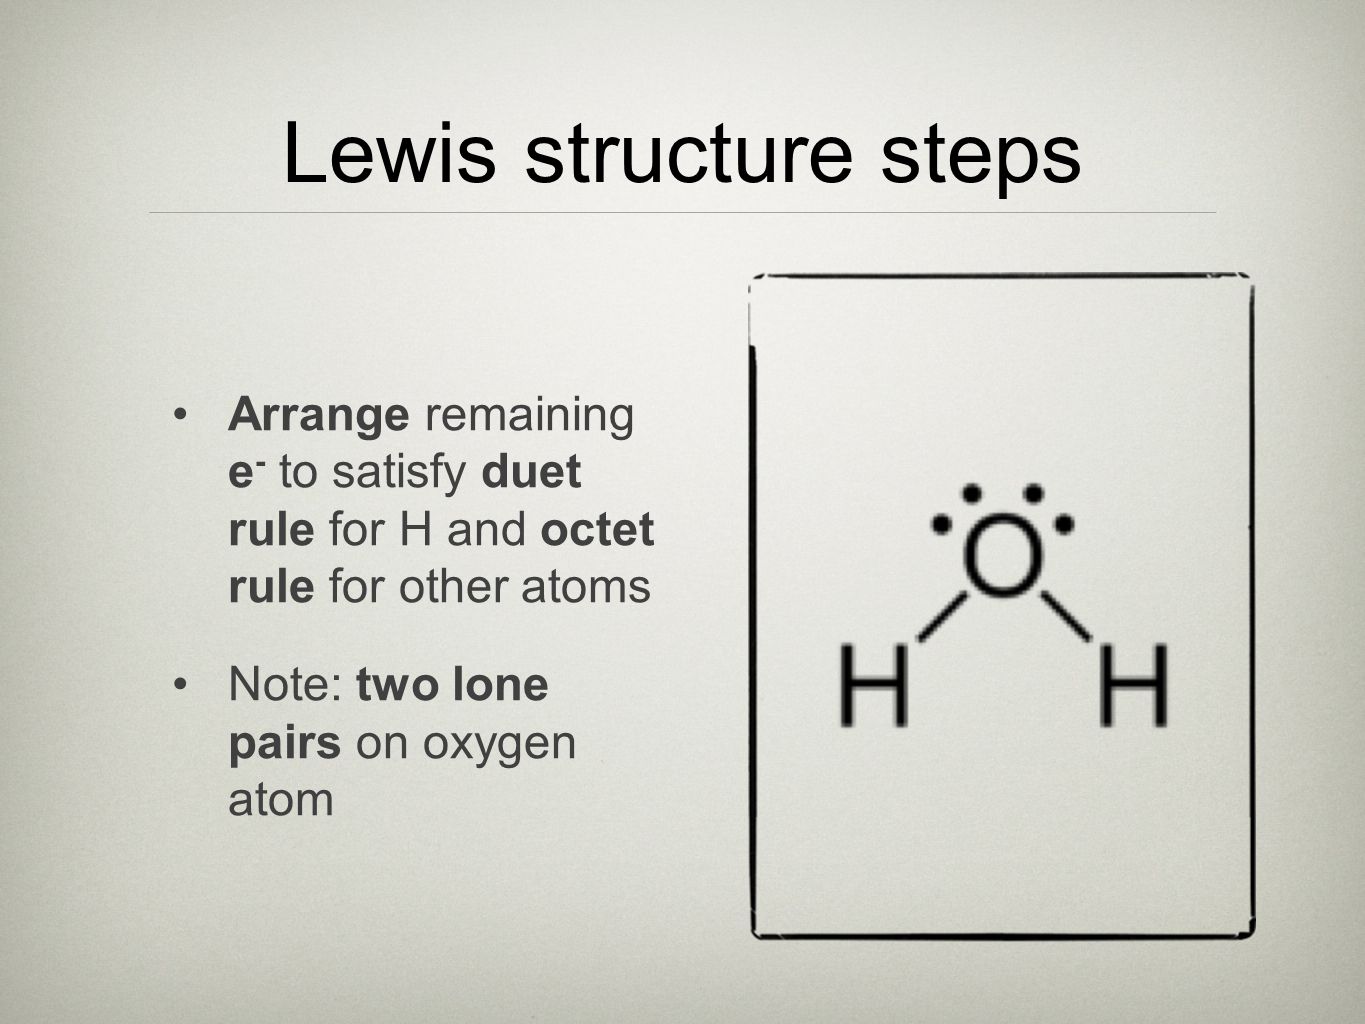 Lewis structure steps Arrange remaining e - to satisfy duet rule for H and octet rule for other atoms Note: two lone pairs on oxygen atom